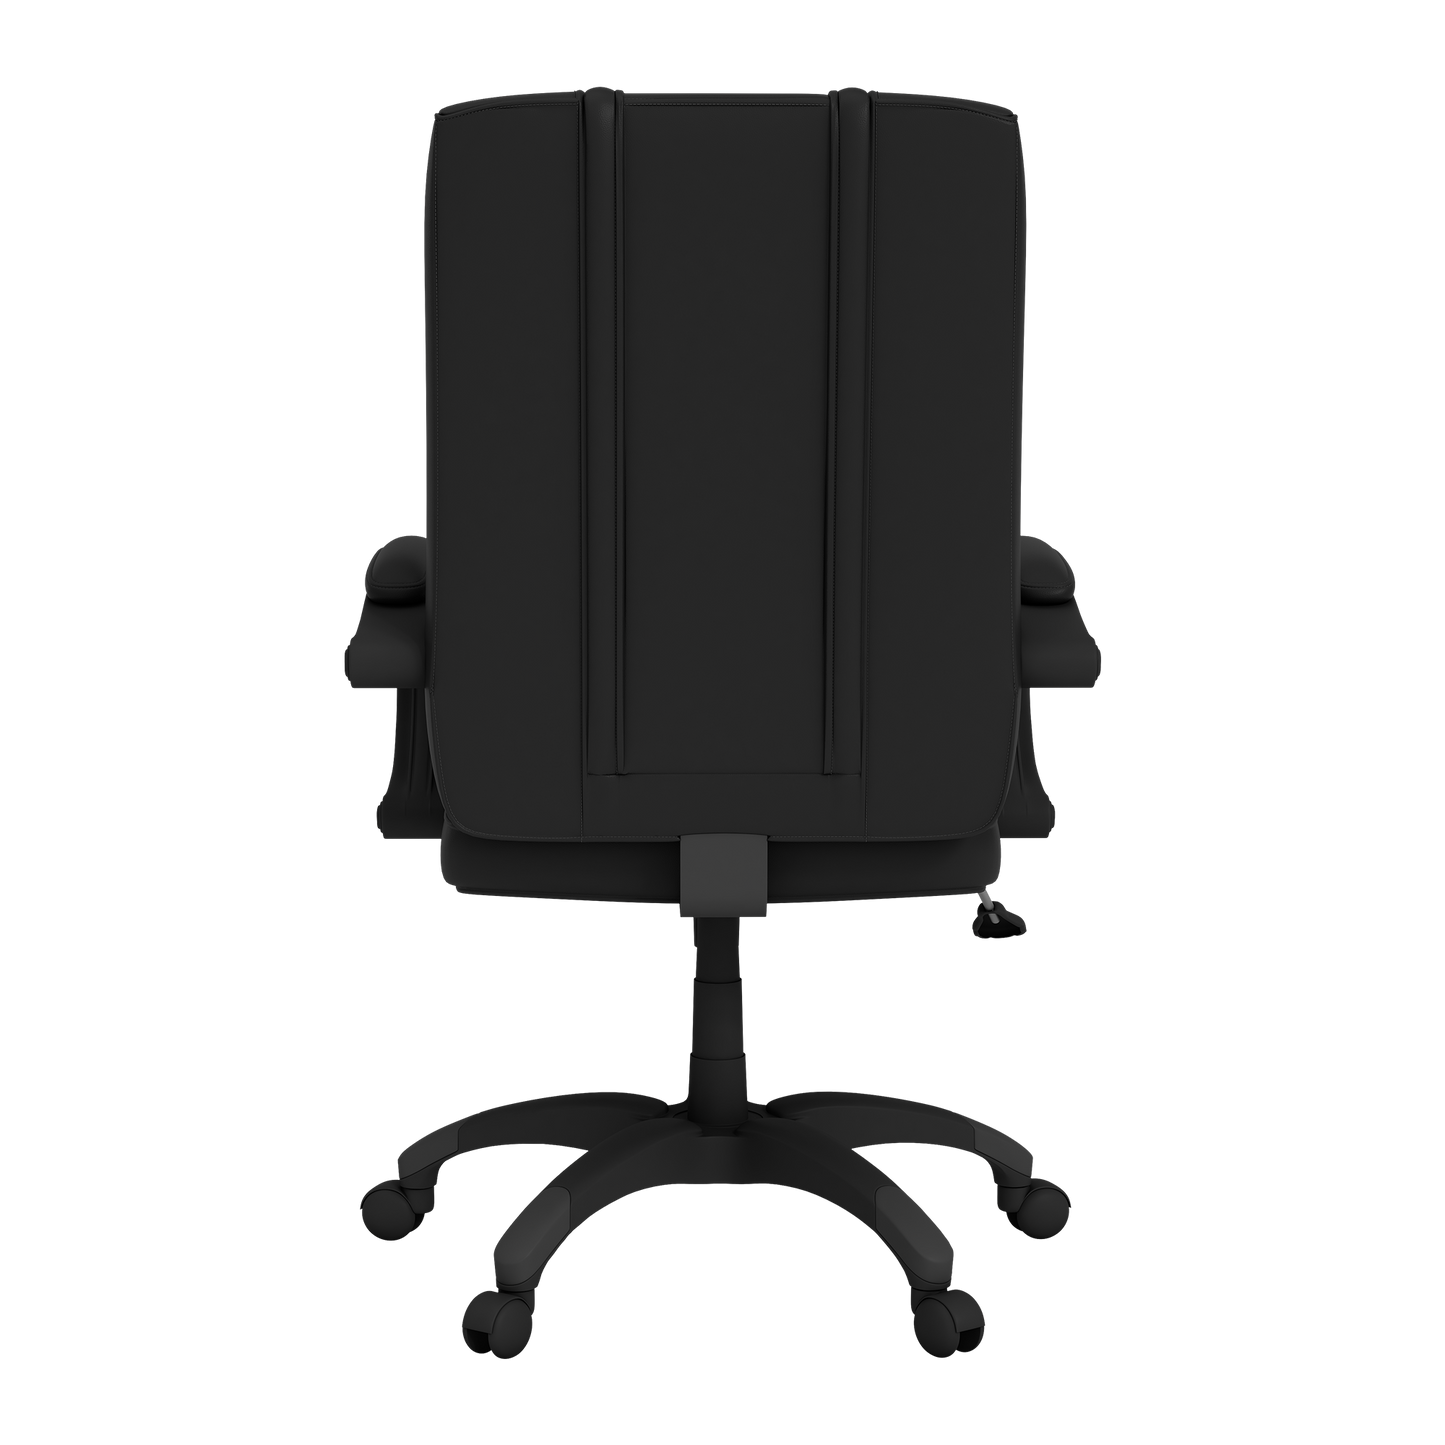 Office Chair 1000 with  Minnesota Vikings Secondary Logo